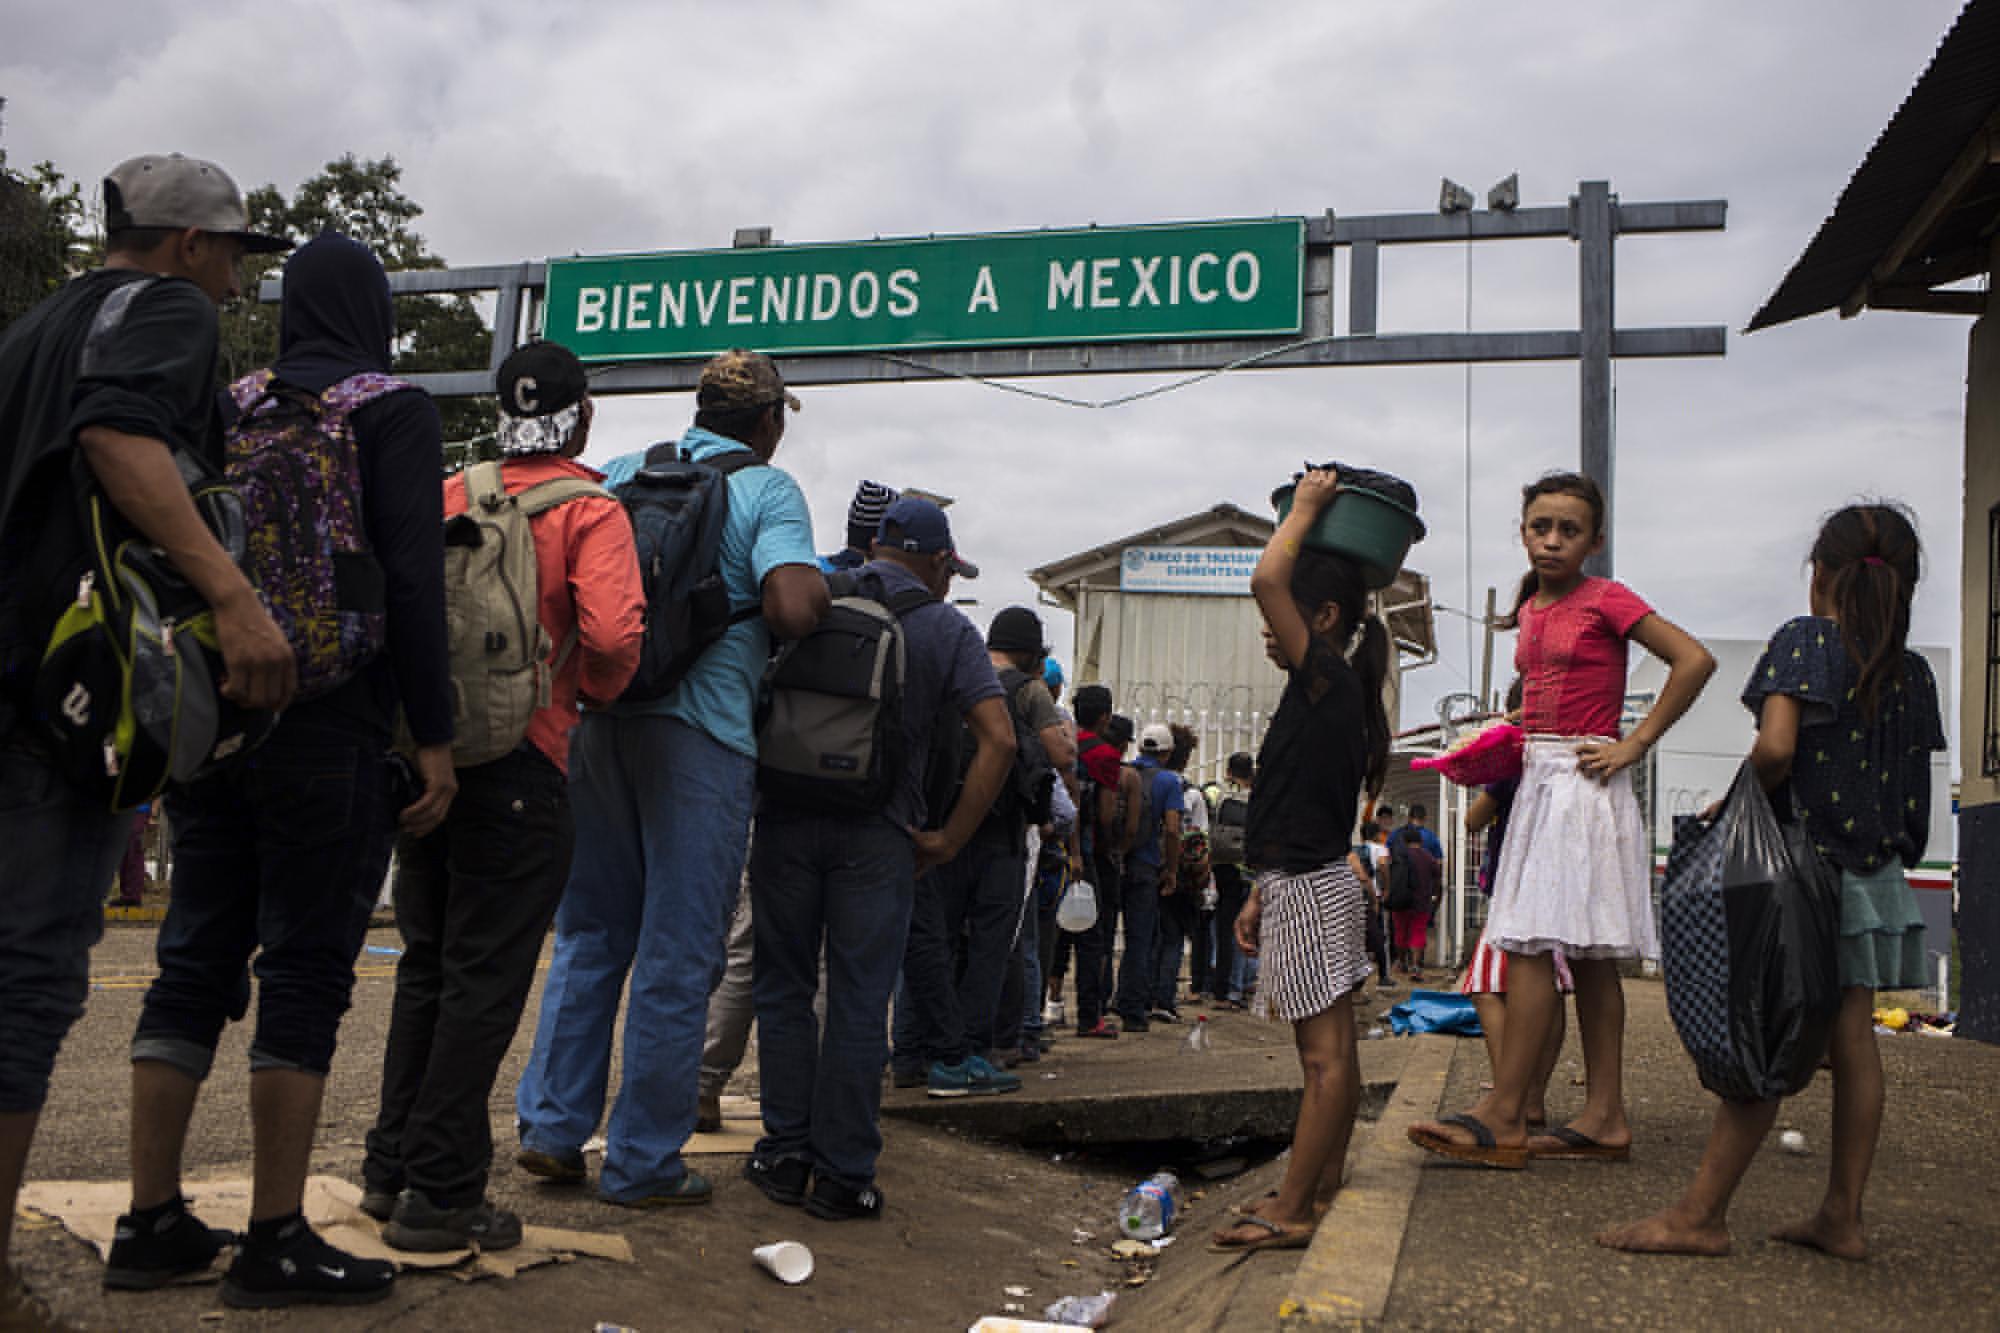 At 11:57 in the morning on January 19, the last group of migrants entered the offices of the border port of entry at El Ceibo to register. The Mexican government promised to take them to find work in a secure location in Tabasco. Photo by Víctor Peña.